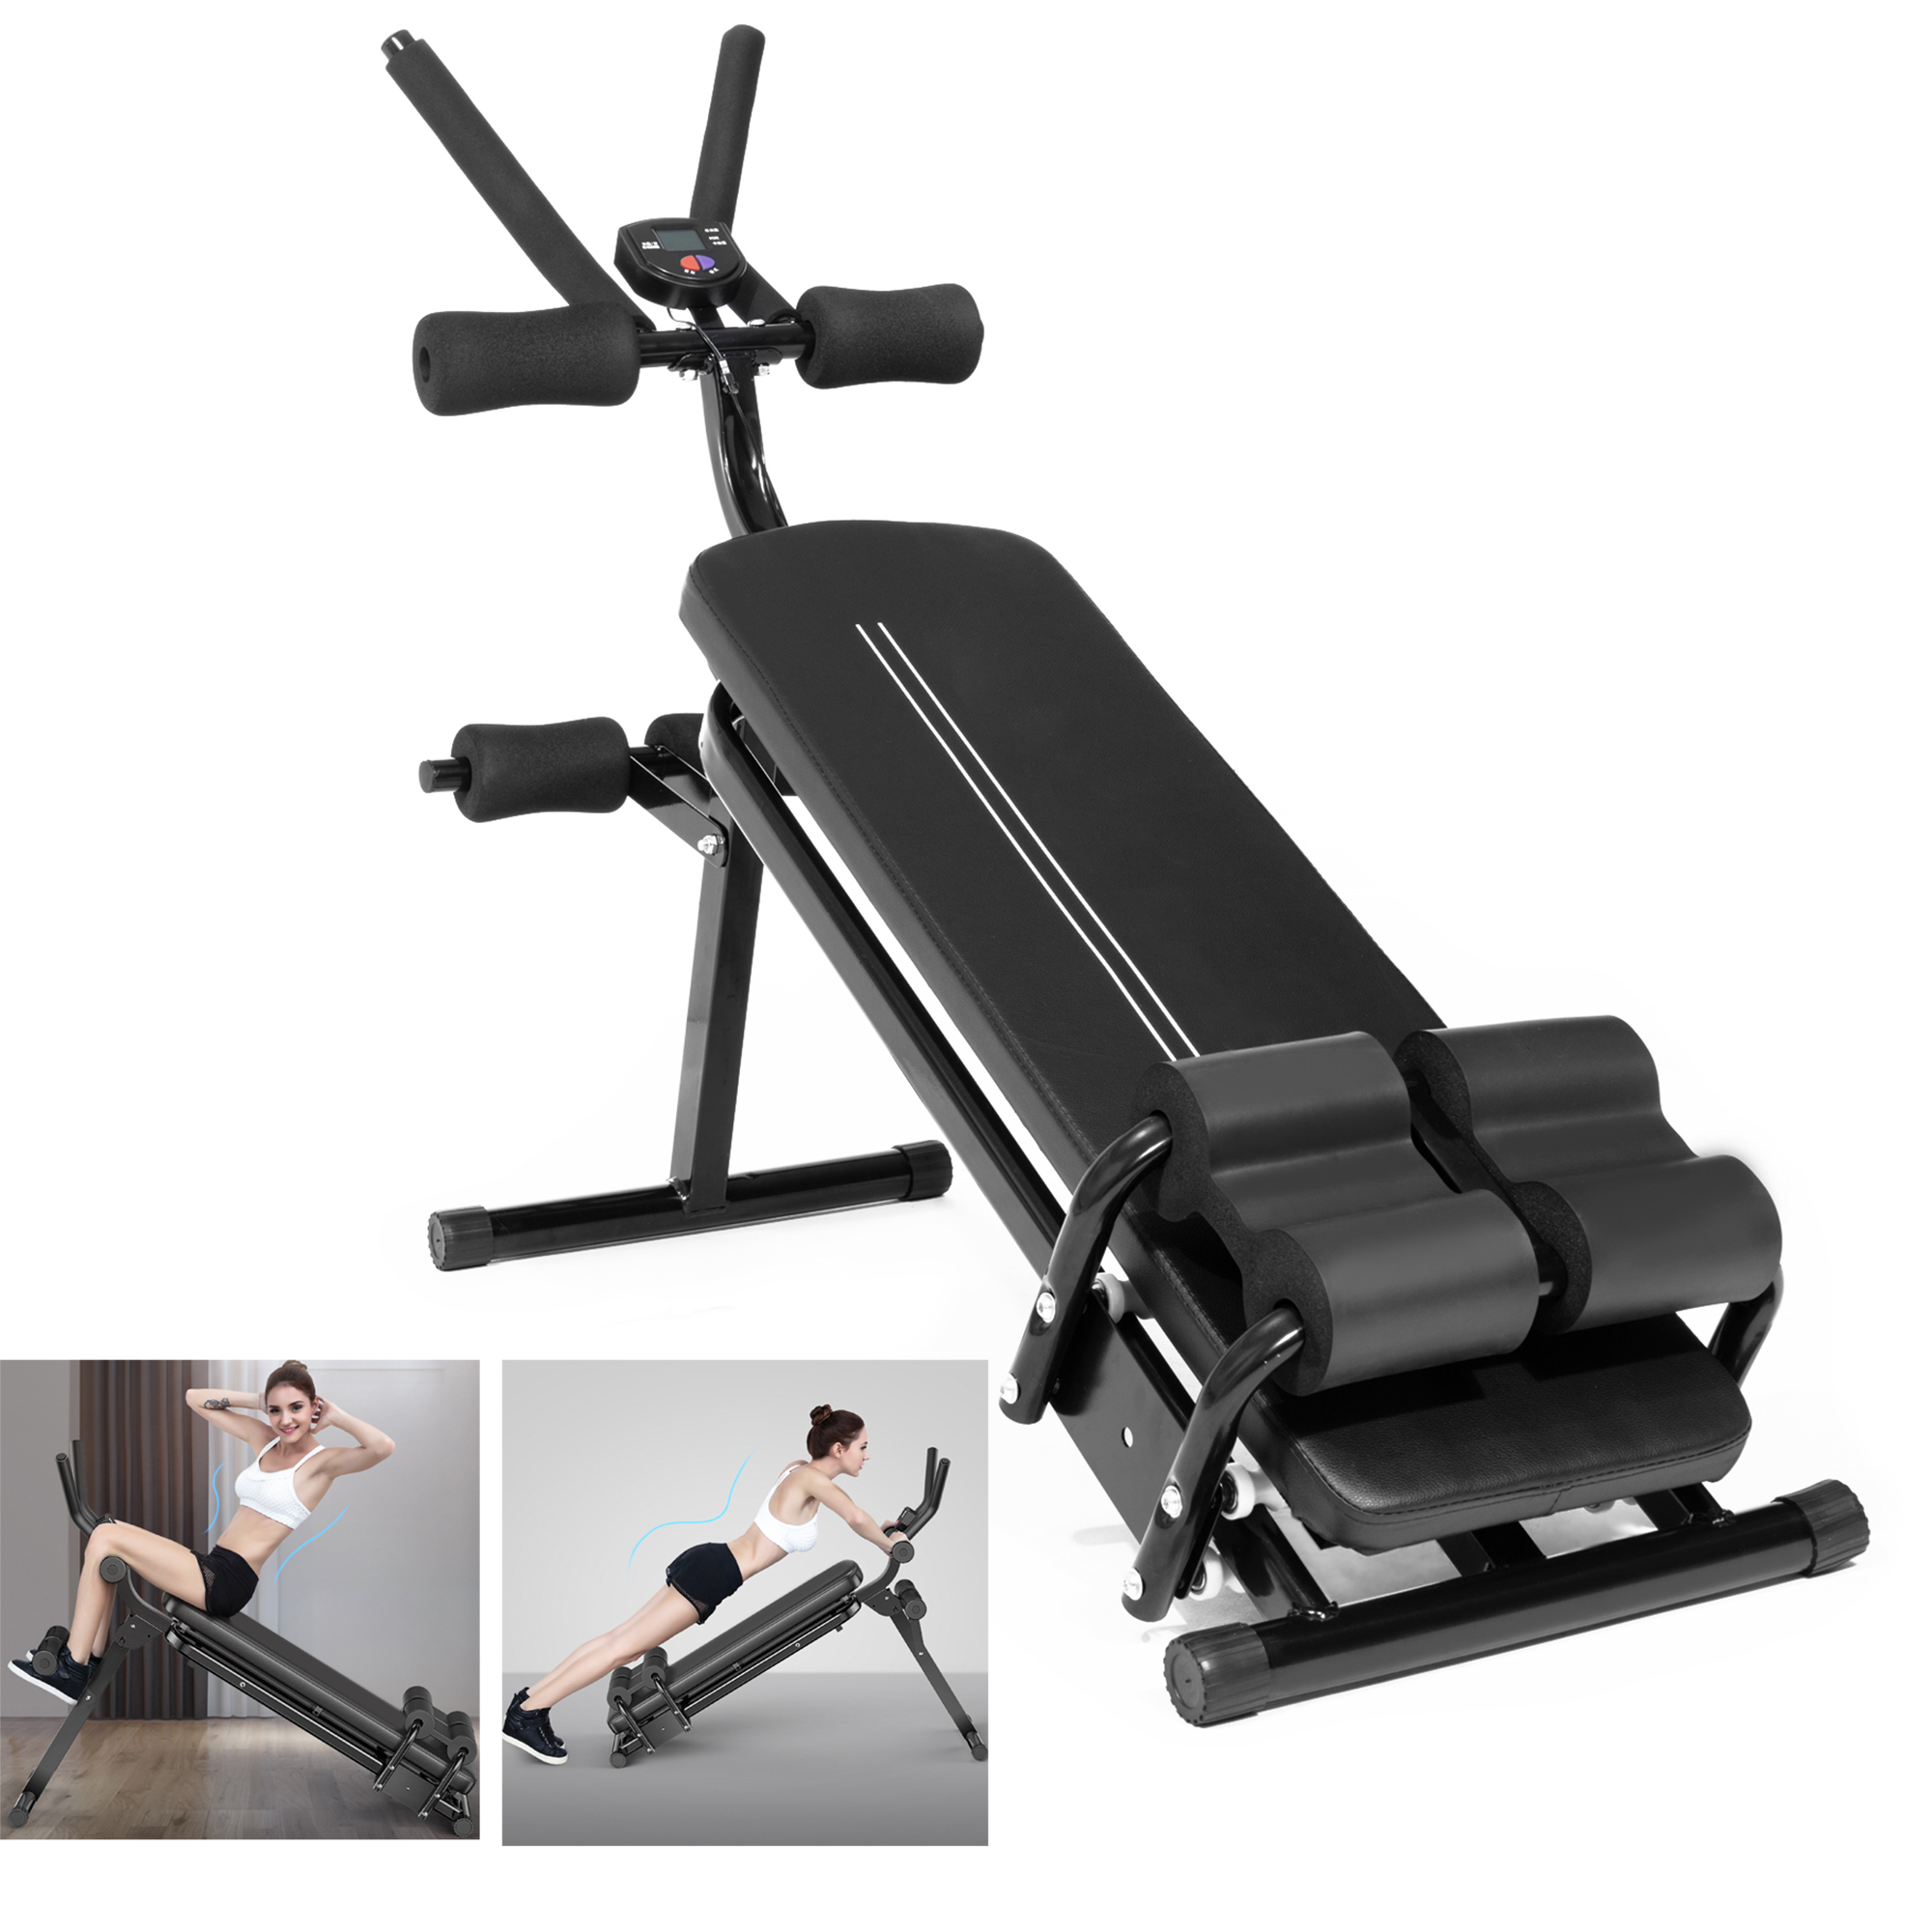 YouLoveIt Abdominal Trainer for Weight Bench, Ab Crunch Sit up and Tummy Exercise Equipment for Abdominal Stomach Workout and Gym Fitness Machine - image 1 of 8